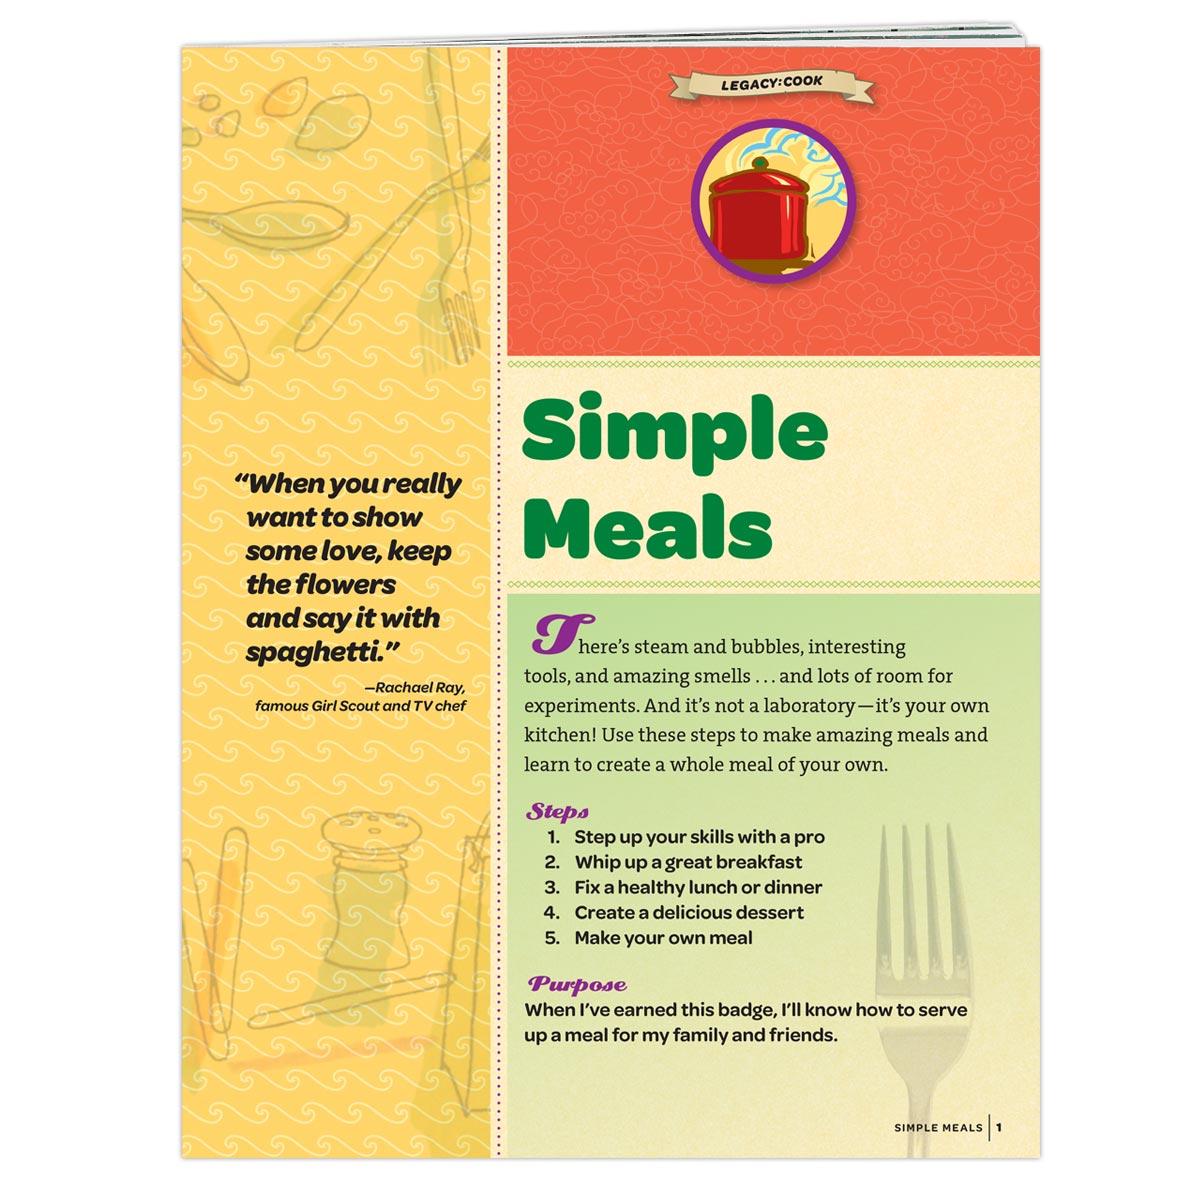 Simple Meals Badge Requirements